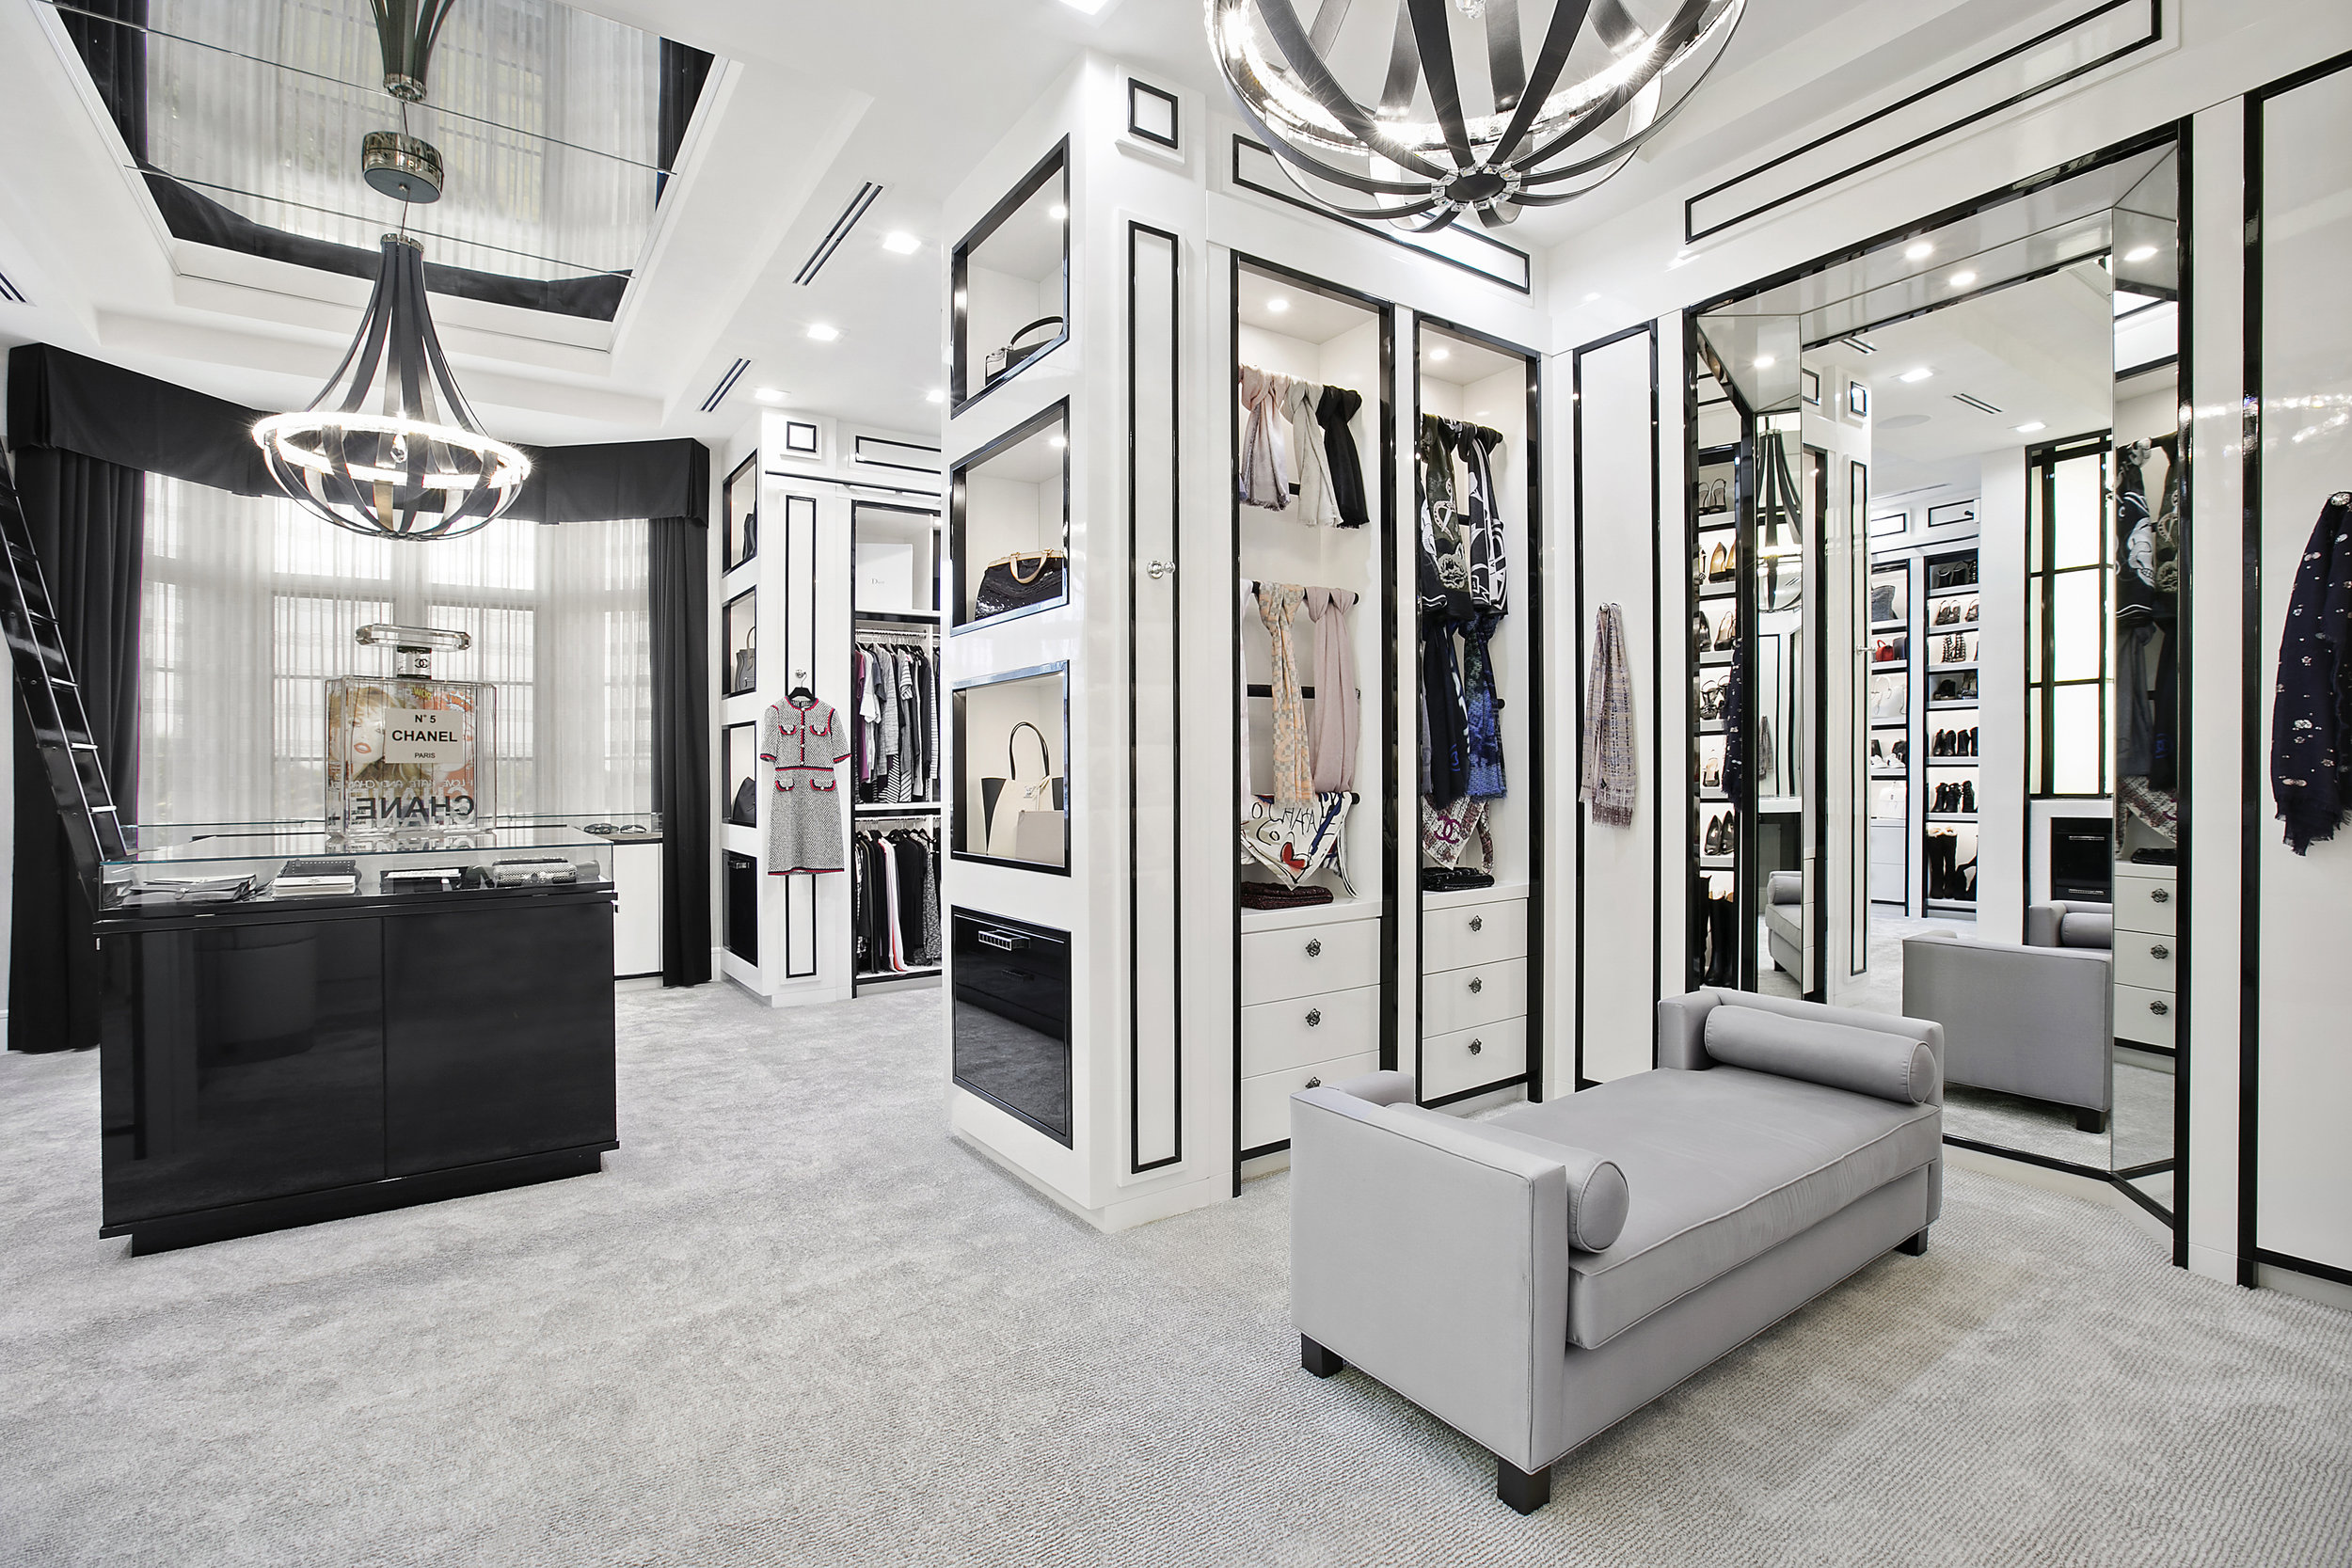 Do You Wish You Had a Chanel Boutique For Your Closet? Only At